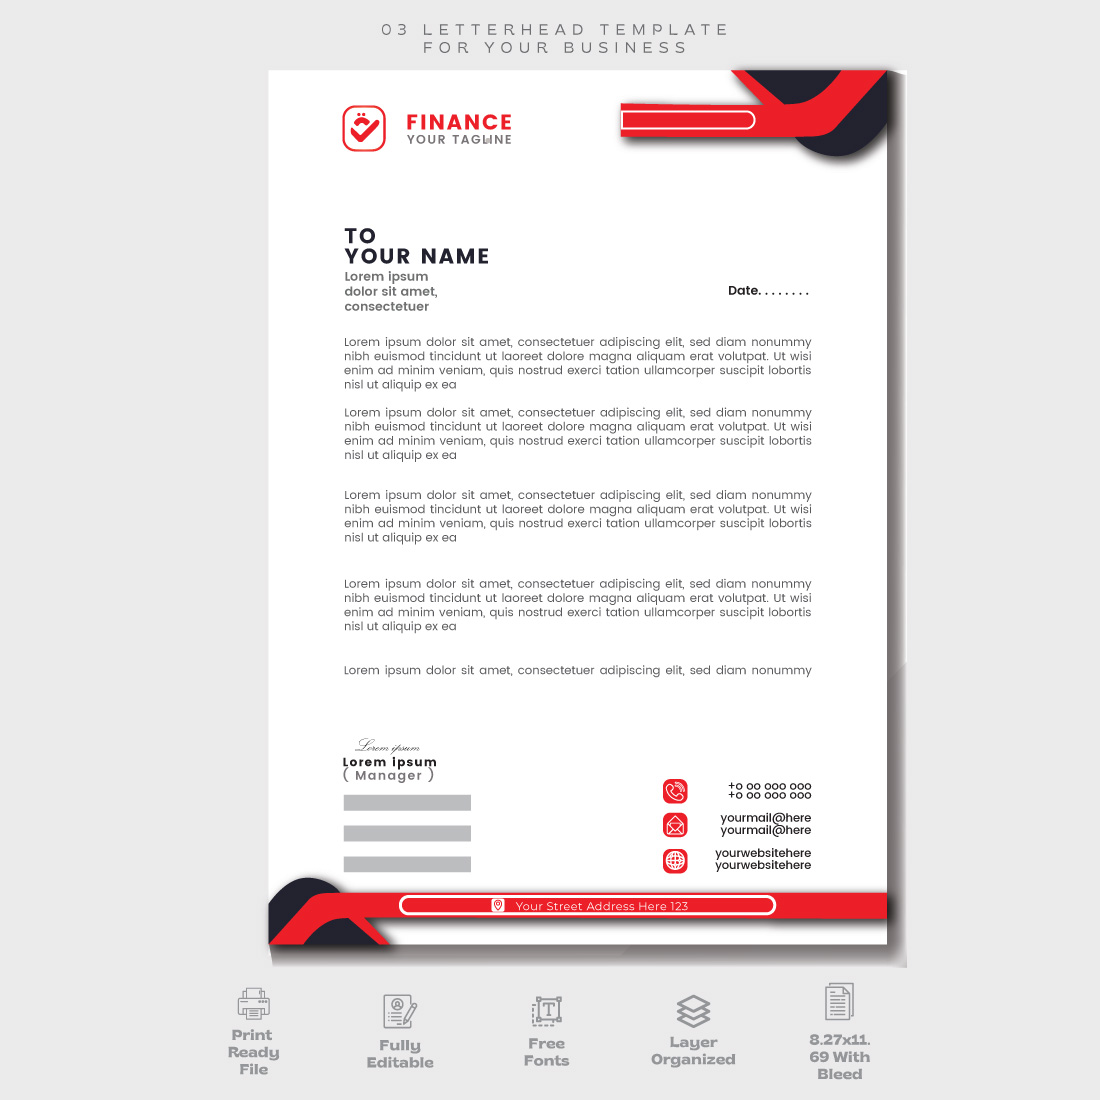 Letterhead with a red and black stripe.